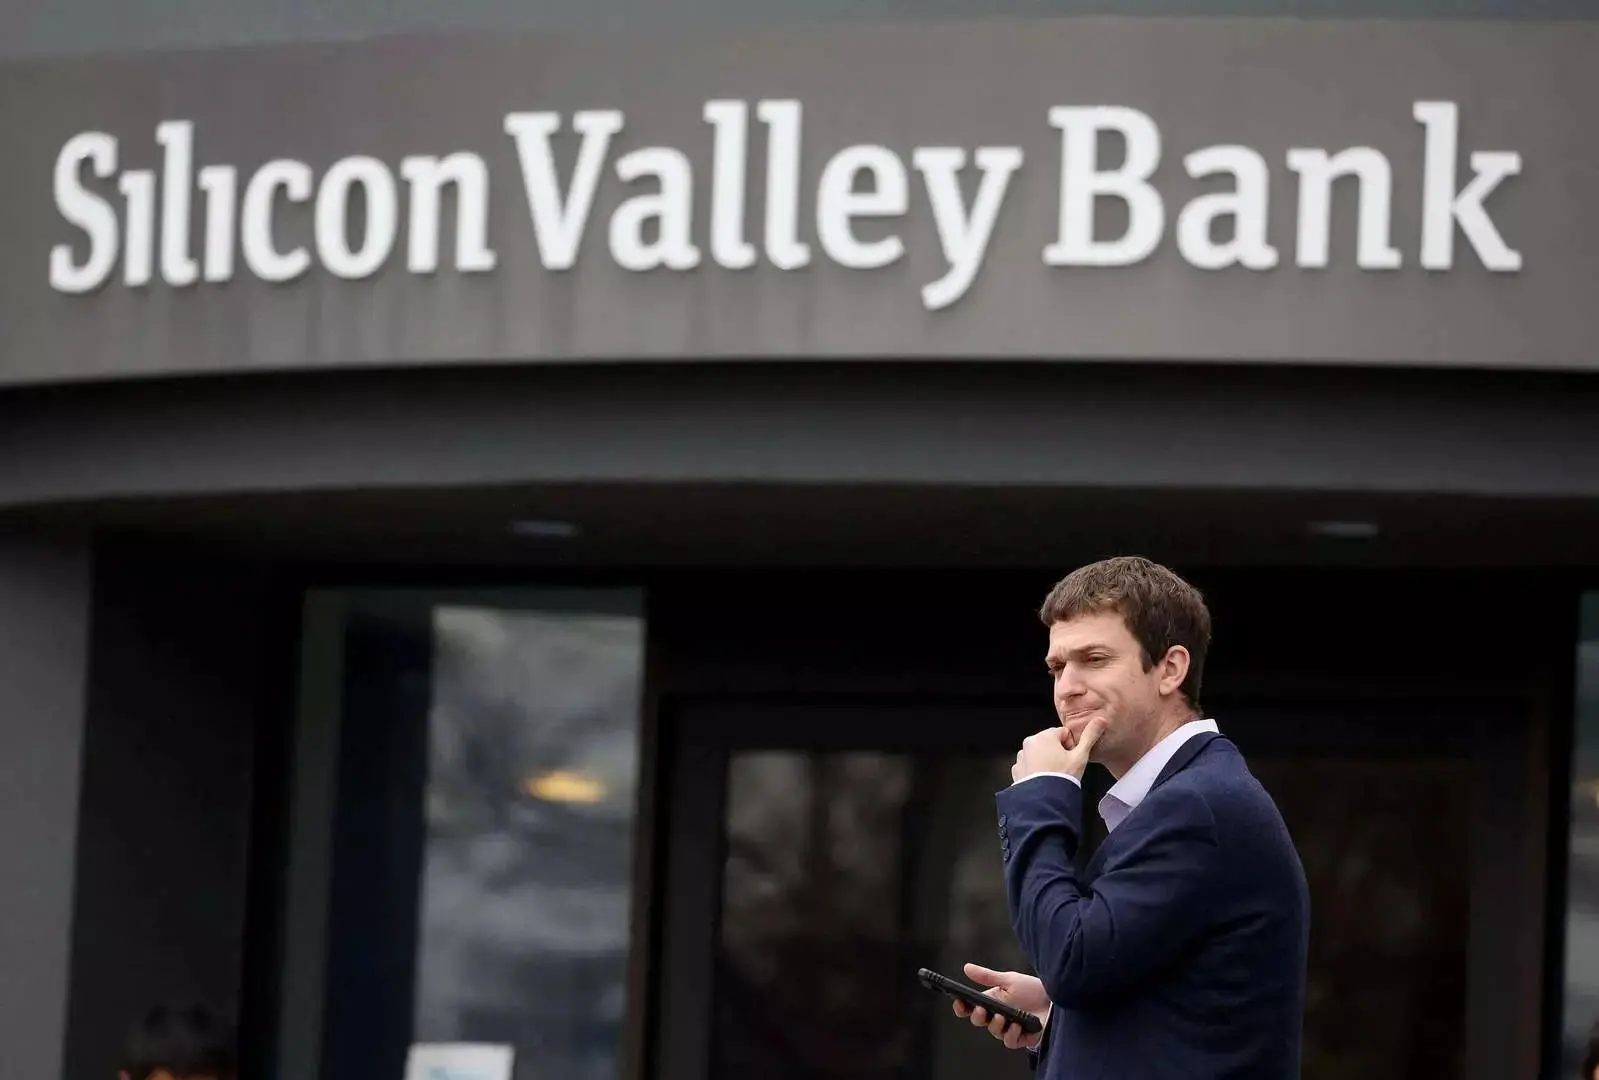 After the failure of Silicon Valley Bank, large banks see a surge in deposits.